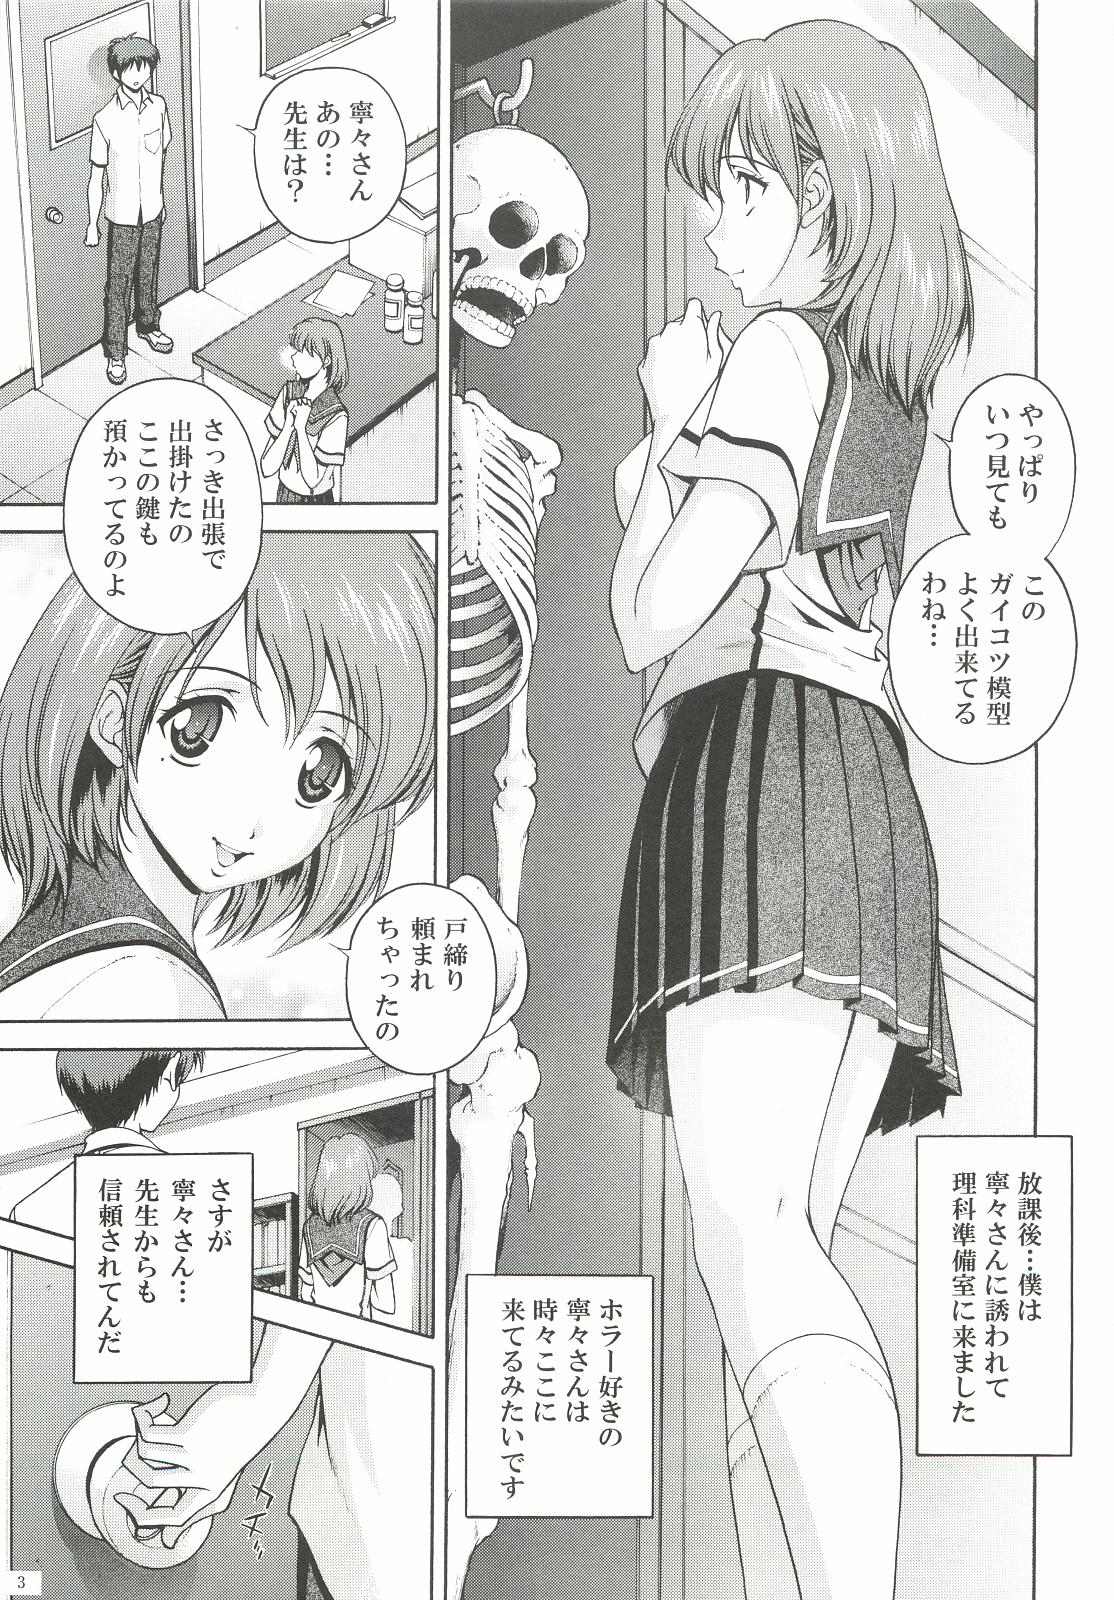 Amigos Oneesan to Issho - Love plus Little - Page 2